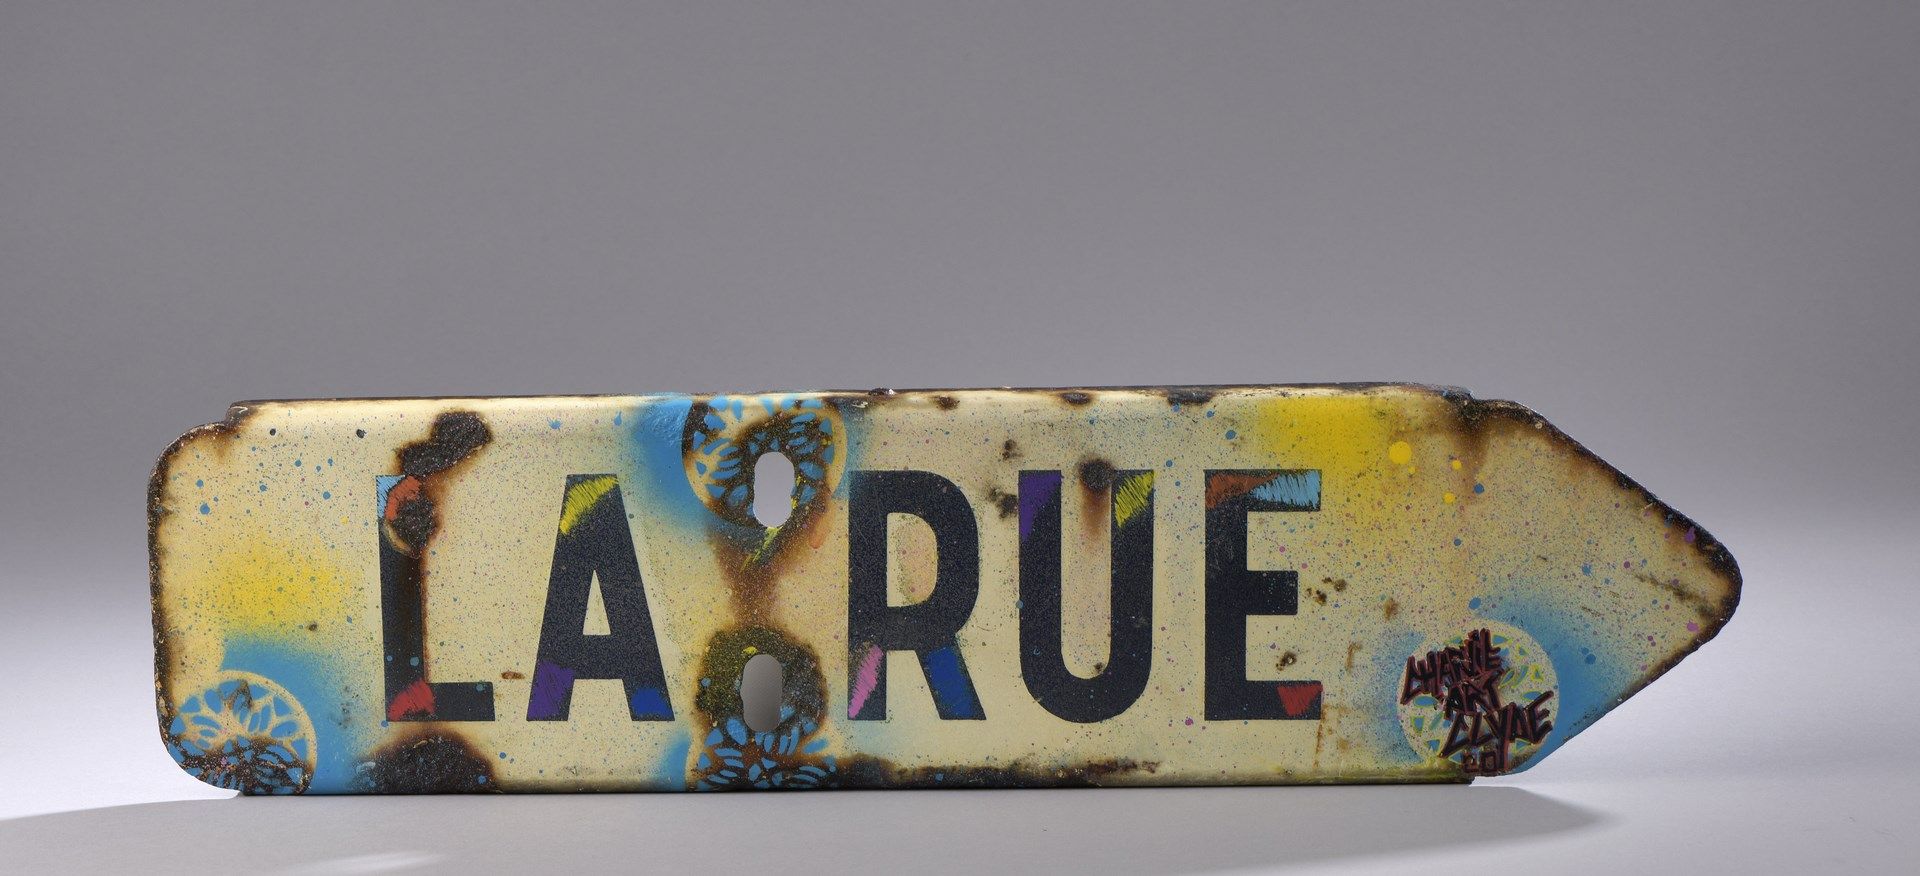 Null CHARLIE ART CLYDE (born 1978)

The street, 2020

Customized street sign by &hellip;